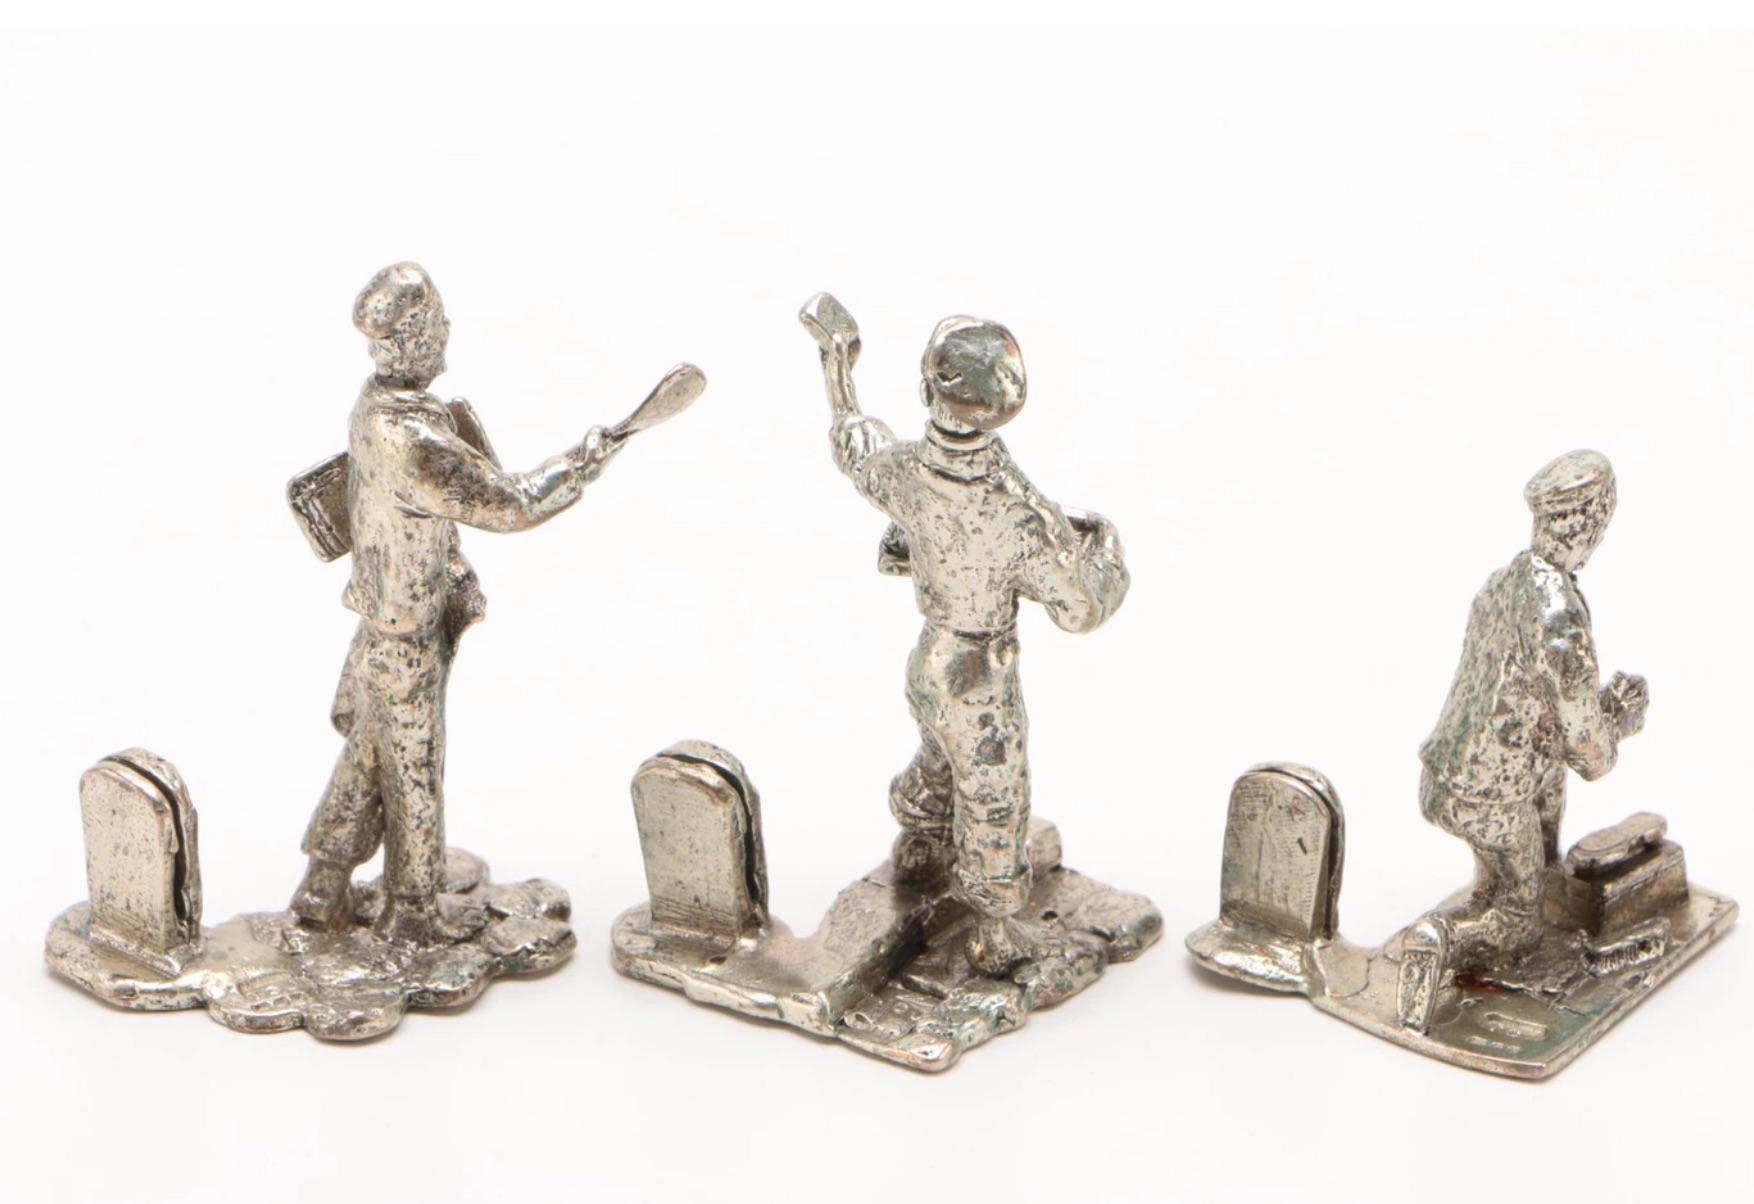 English Sterling Silver Figural Menu/Place Card Holders in Harrods of London Box In Good Condition For Sale In West Palm Beach, FL